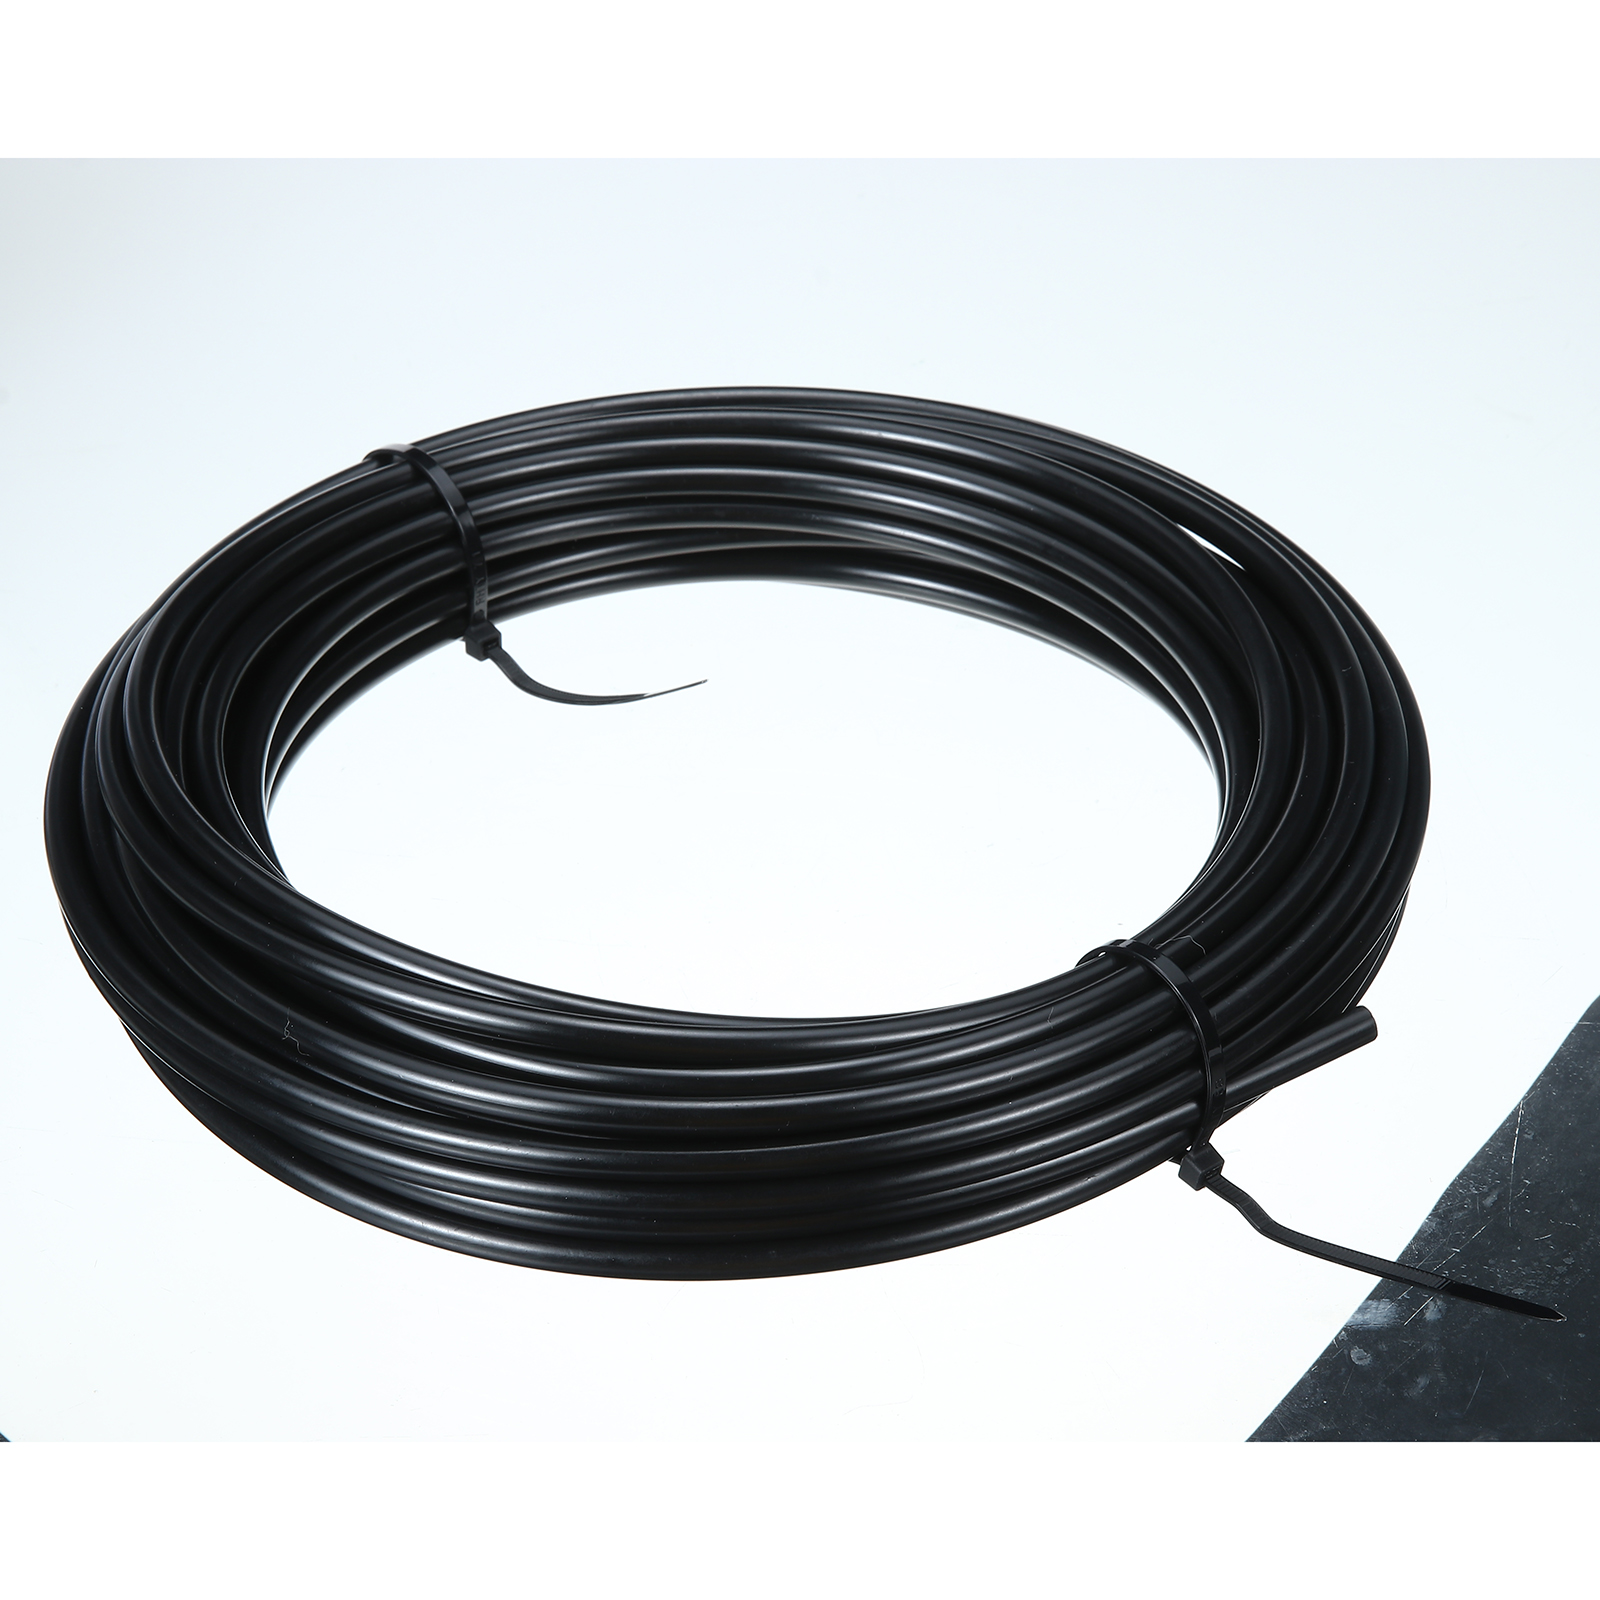 44PCS-15FT-Misting-Cooling-System-PE-Spray-Water-Systemfor-Garden-Landscaping-Greenhouse-1884554-35